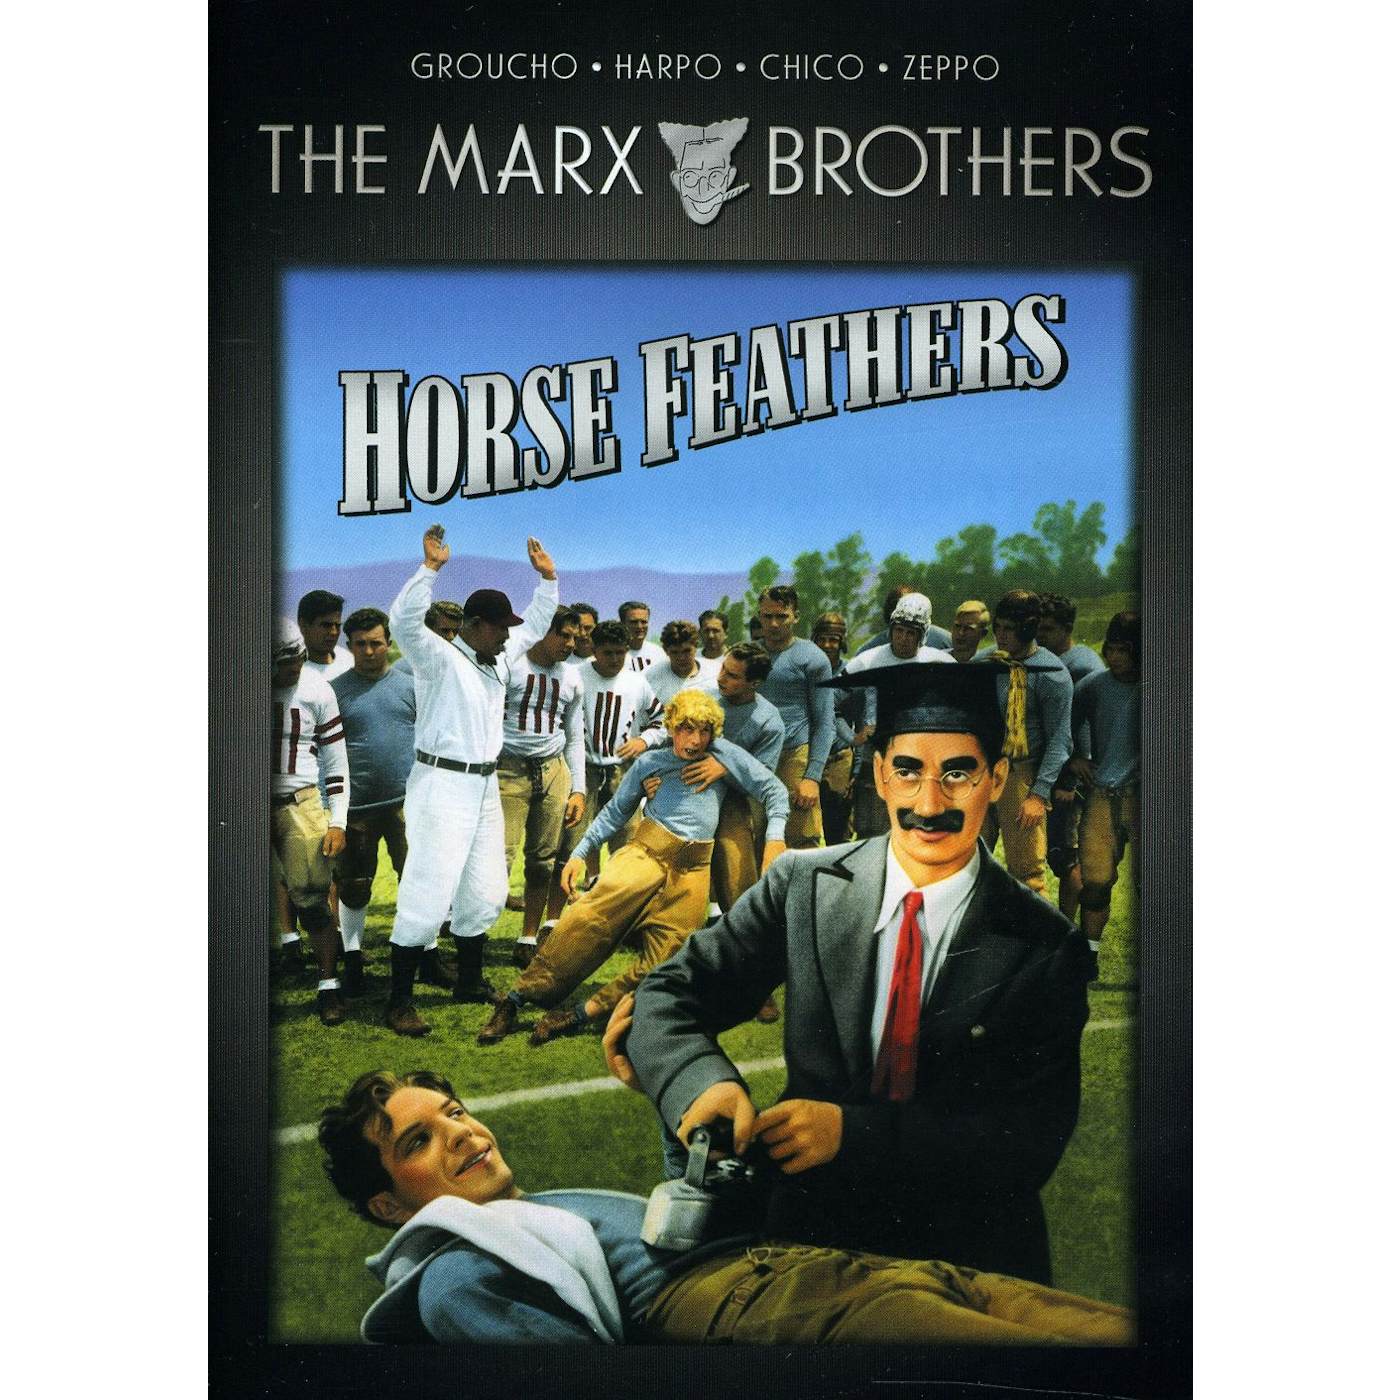 HORSE FEATHERS DVD